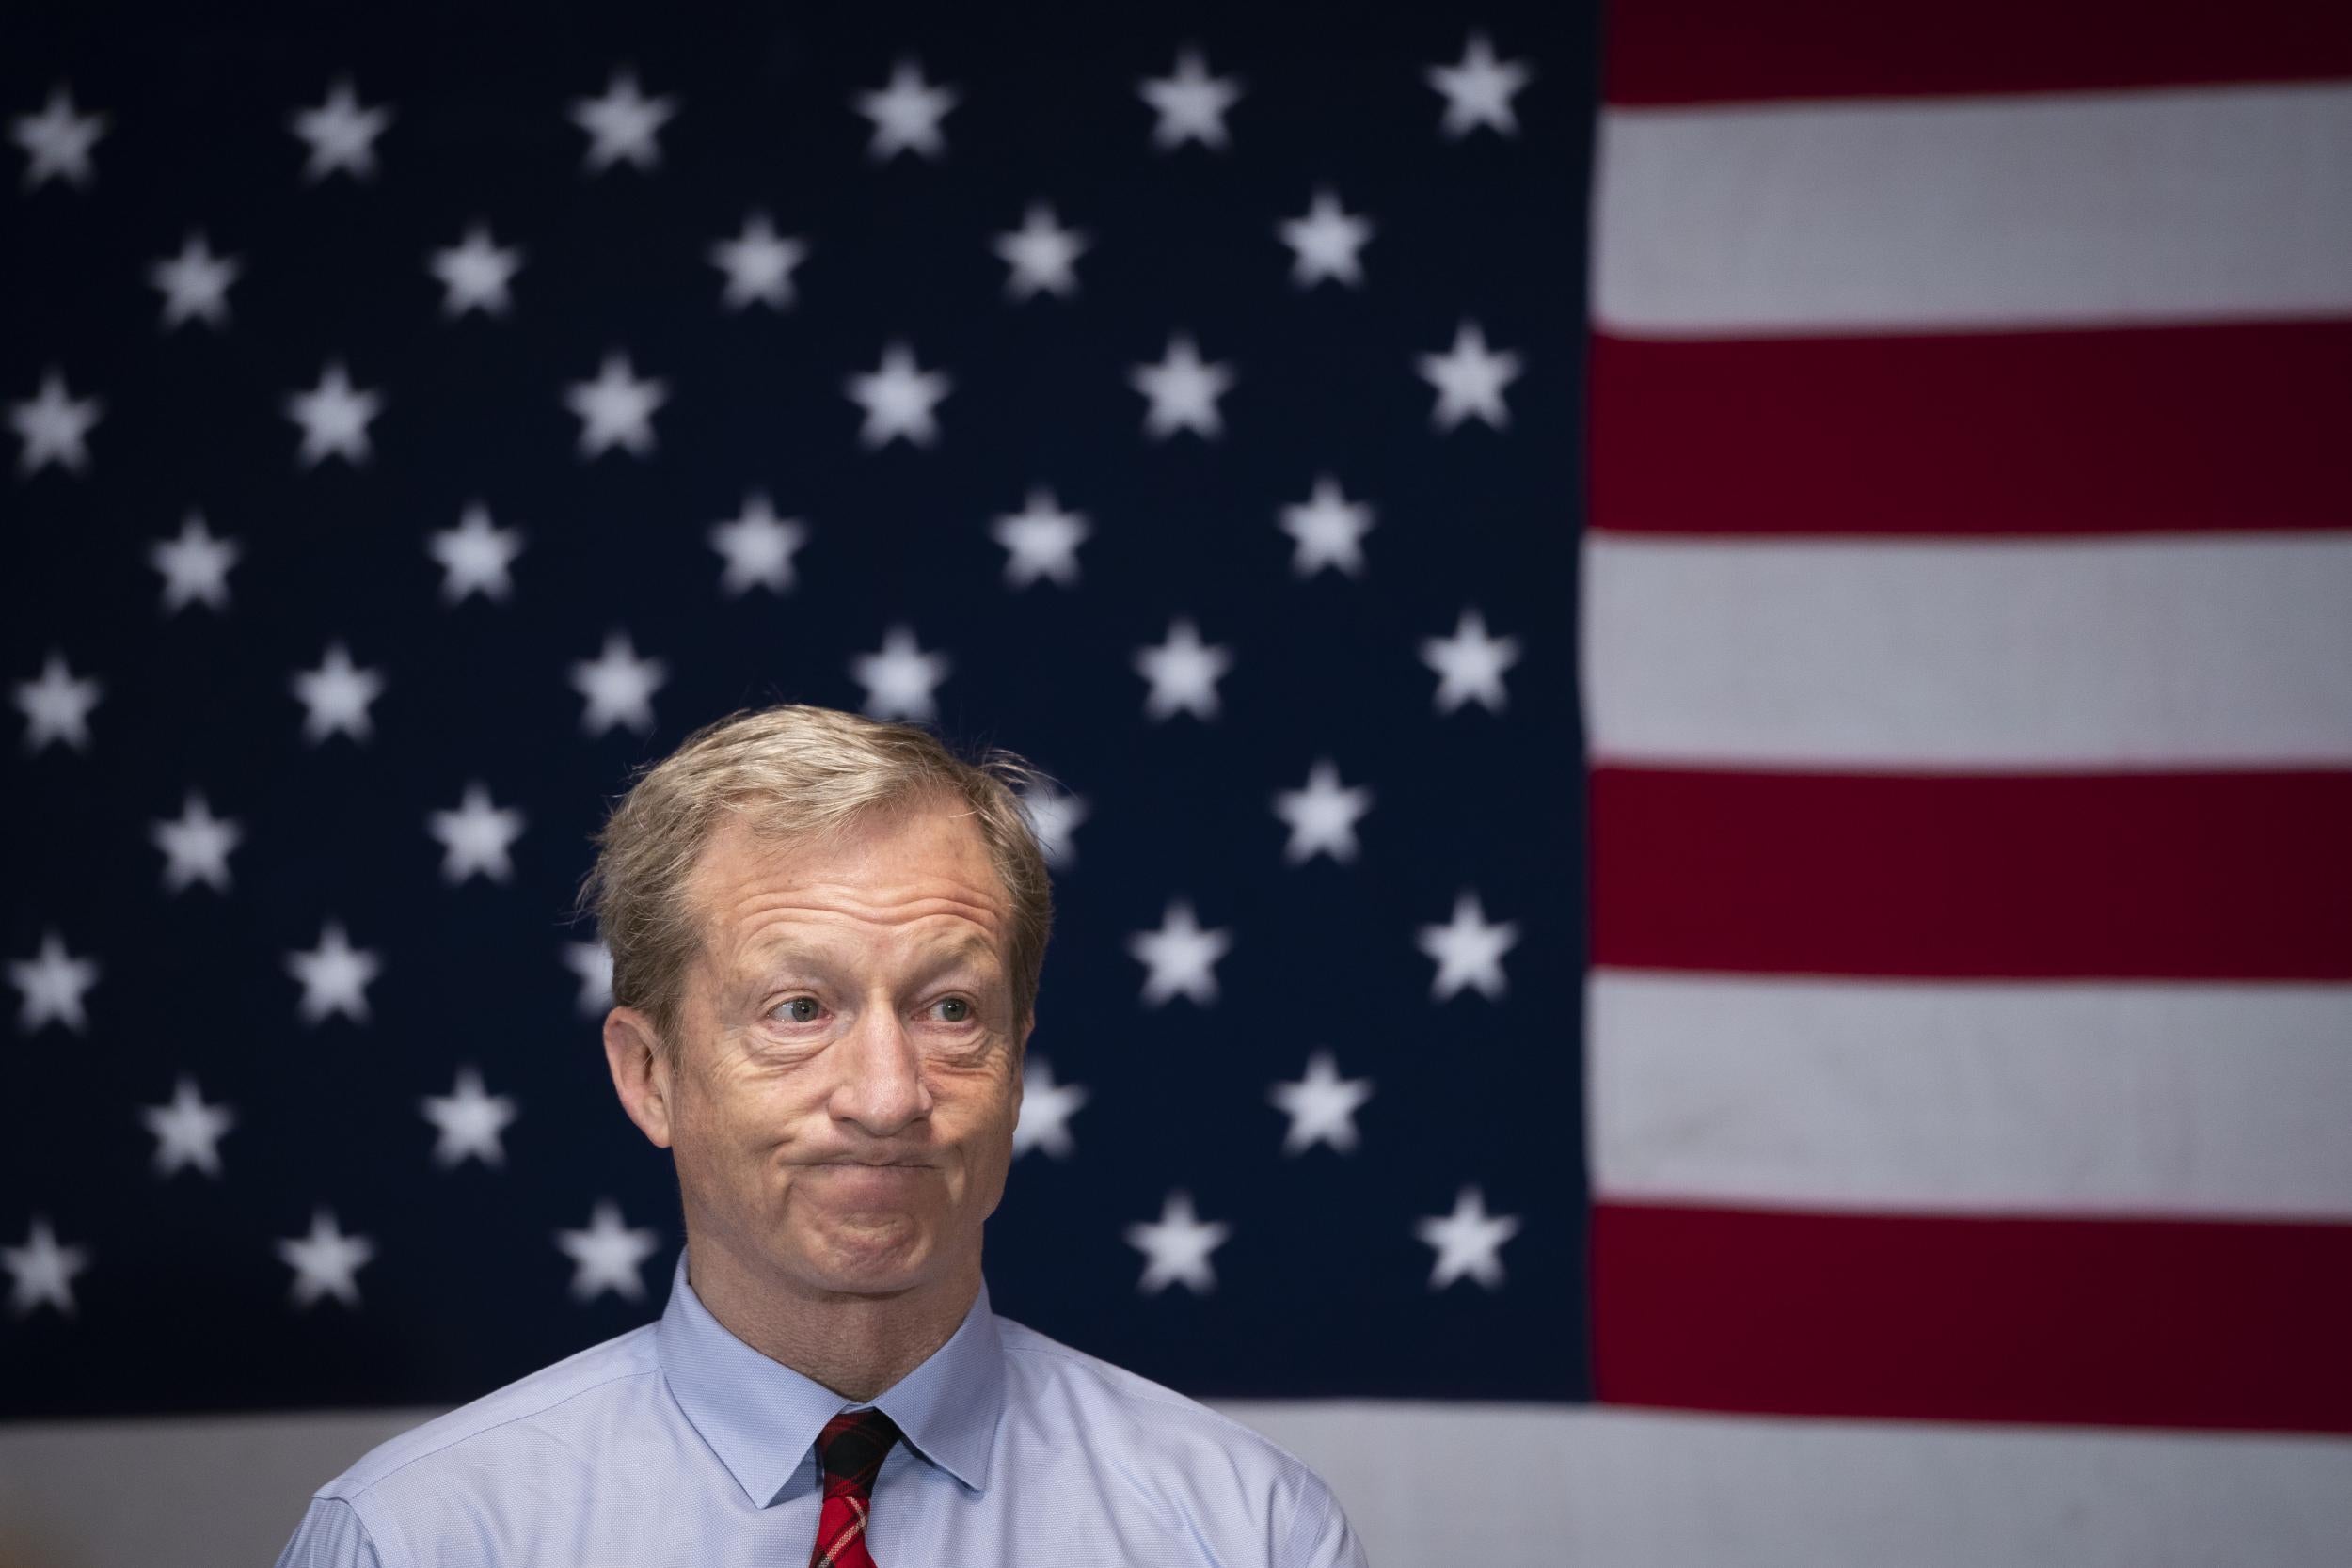 Tom Steyer dropped out of the 2020 presidential race after a third-place finish in South Carolina, where he had gambled on his campaign's turning point.